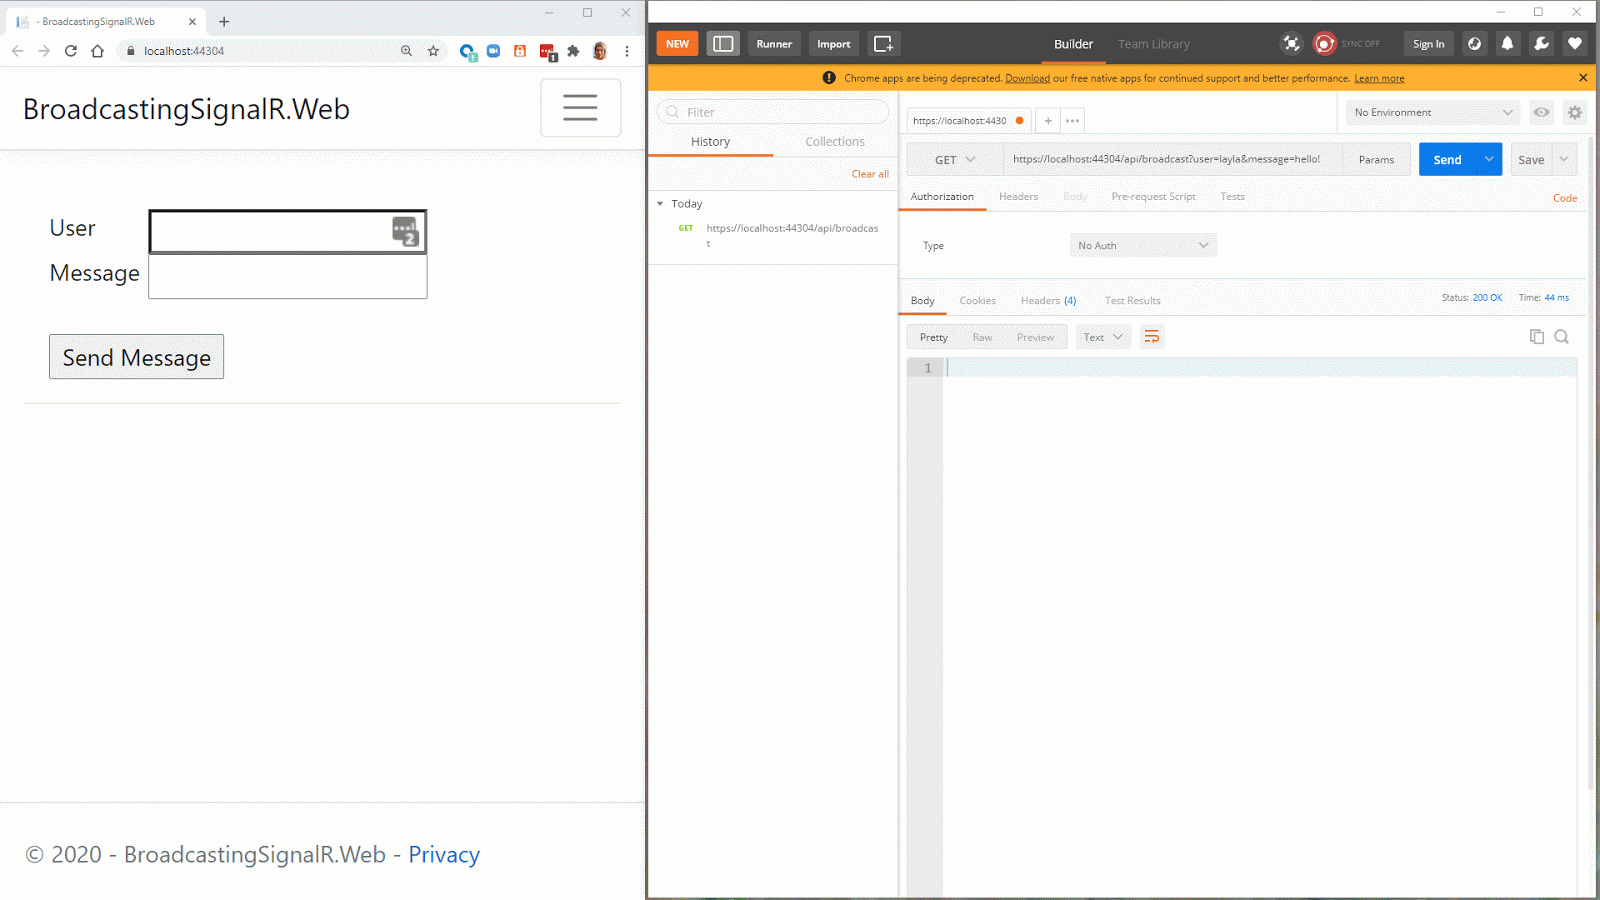 gif of postman making an api call and the message showing in the browser